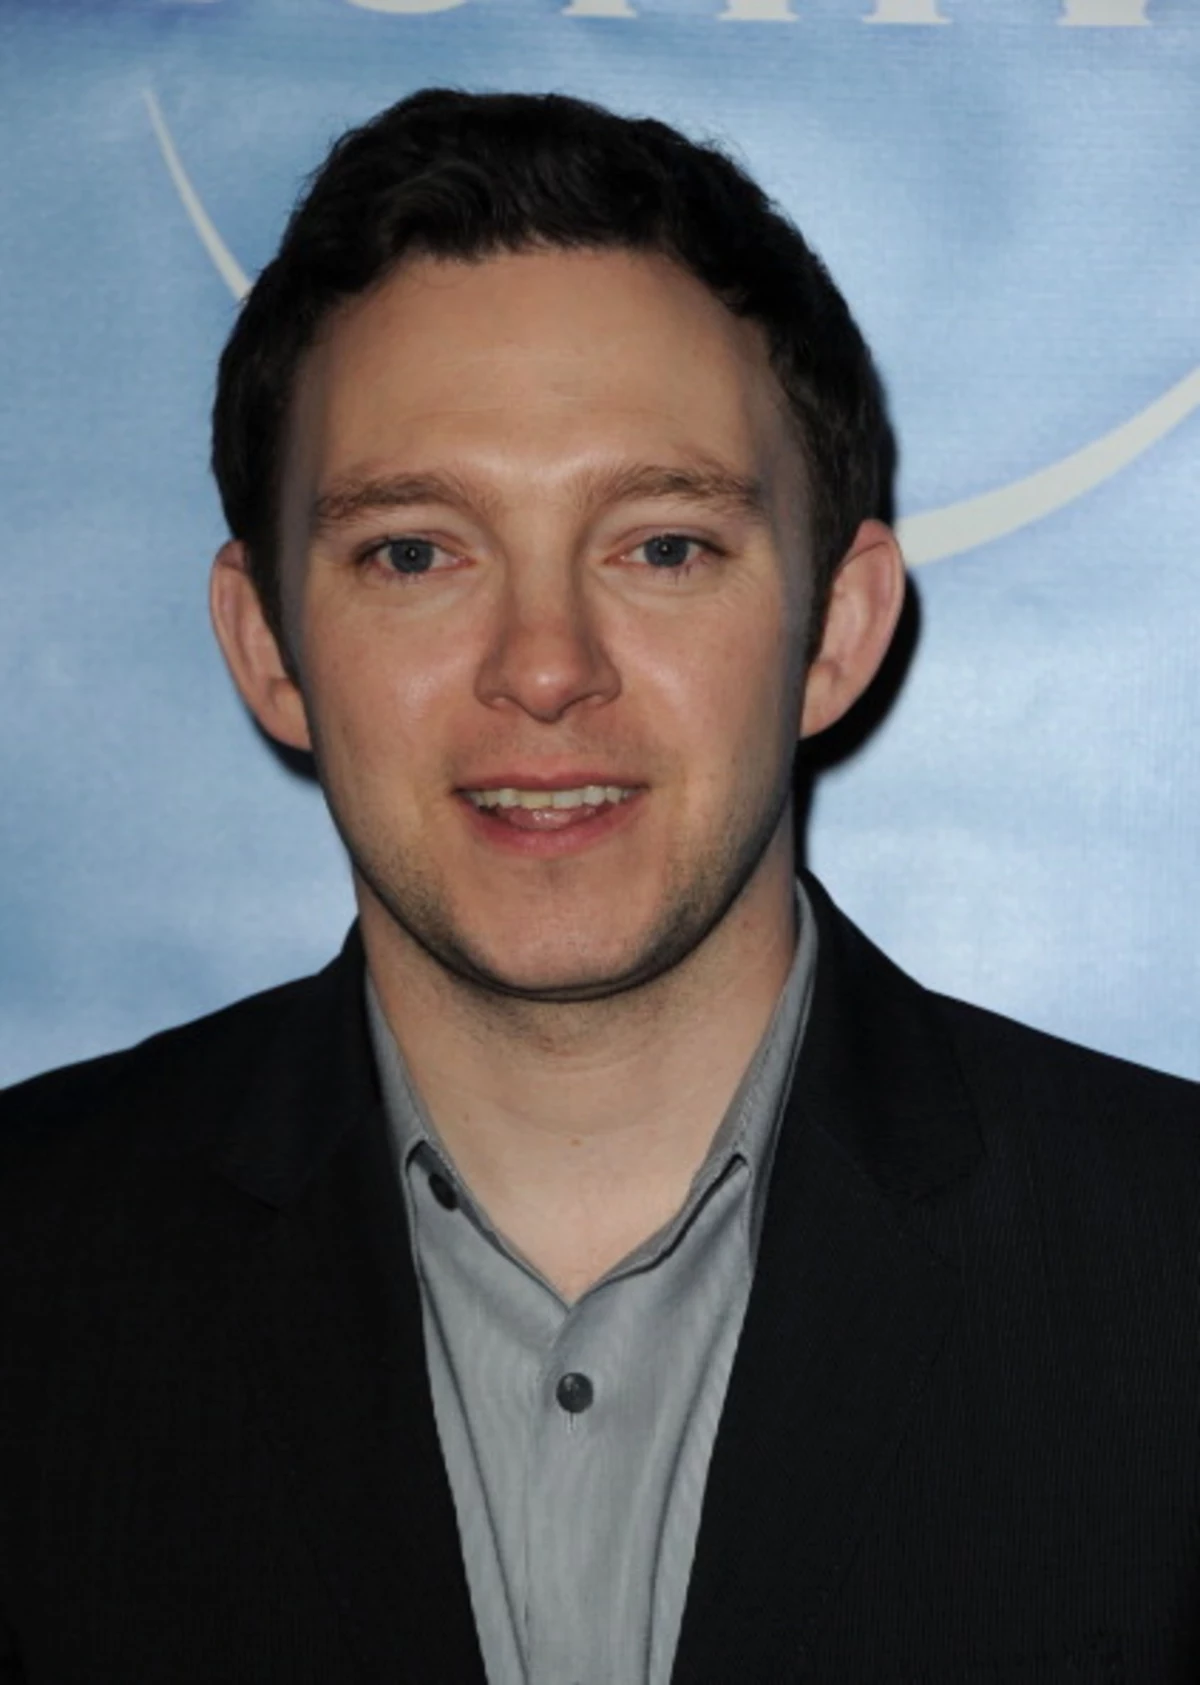 Nate Corddry From NBC’s “Harry’s Law” [INTERVIEW]